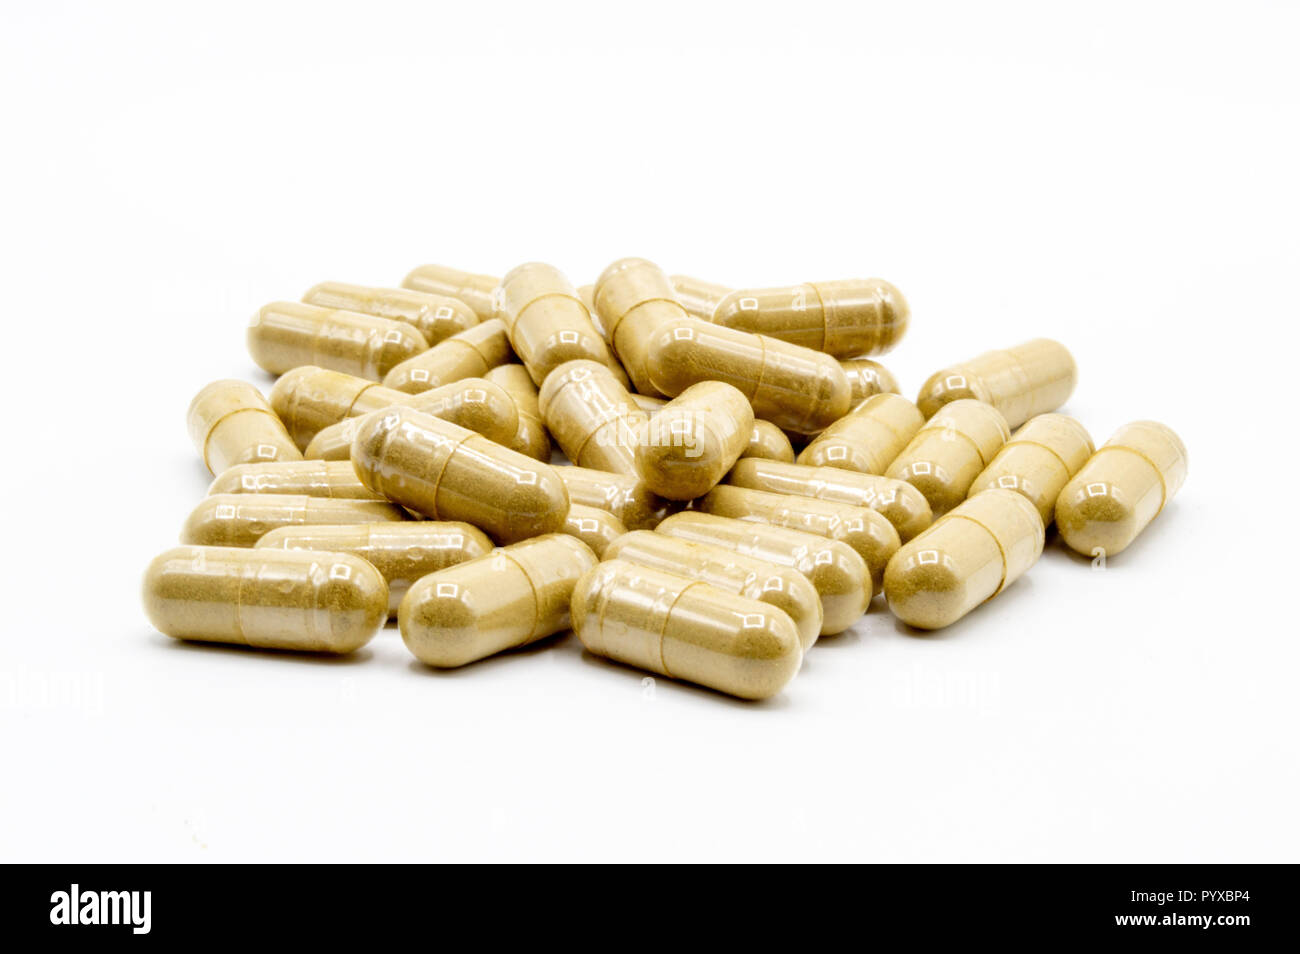 Green Kratom capsules on white background with all pills in focus. Stock Photo